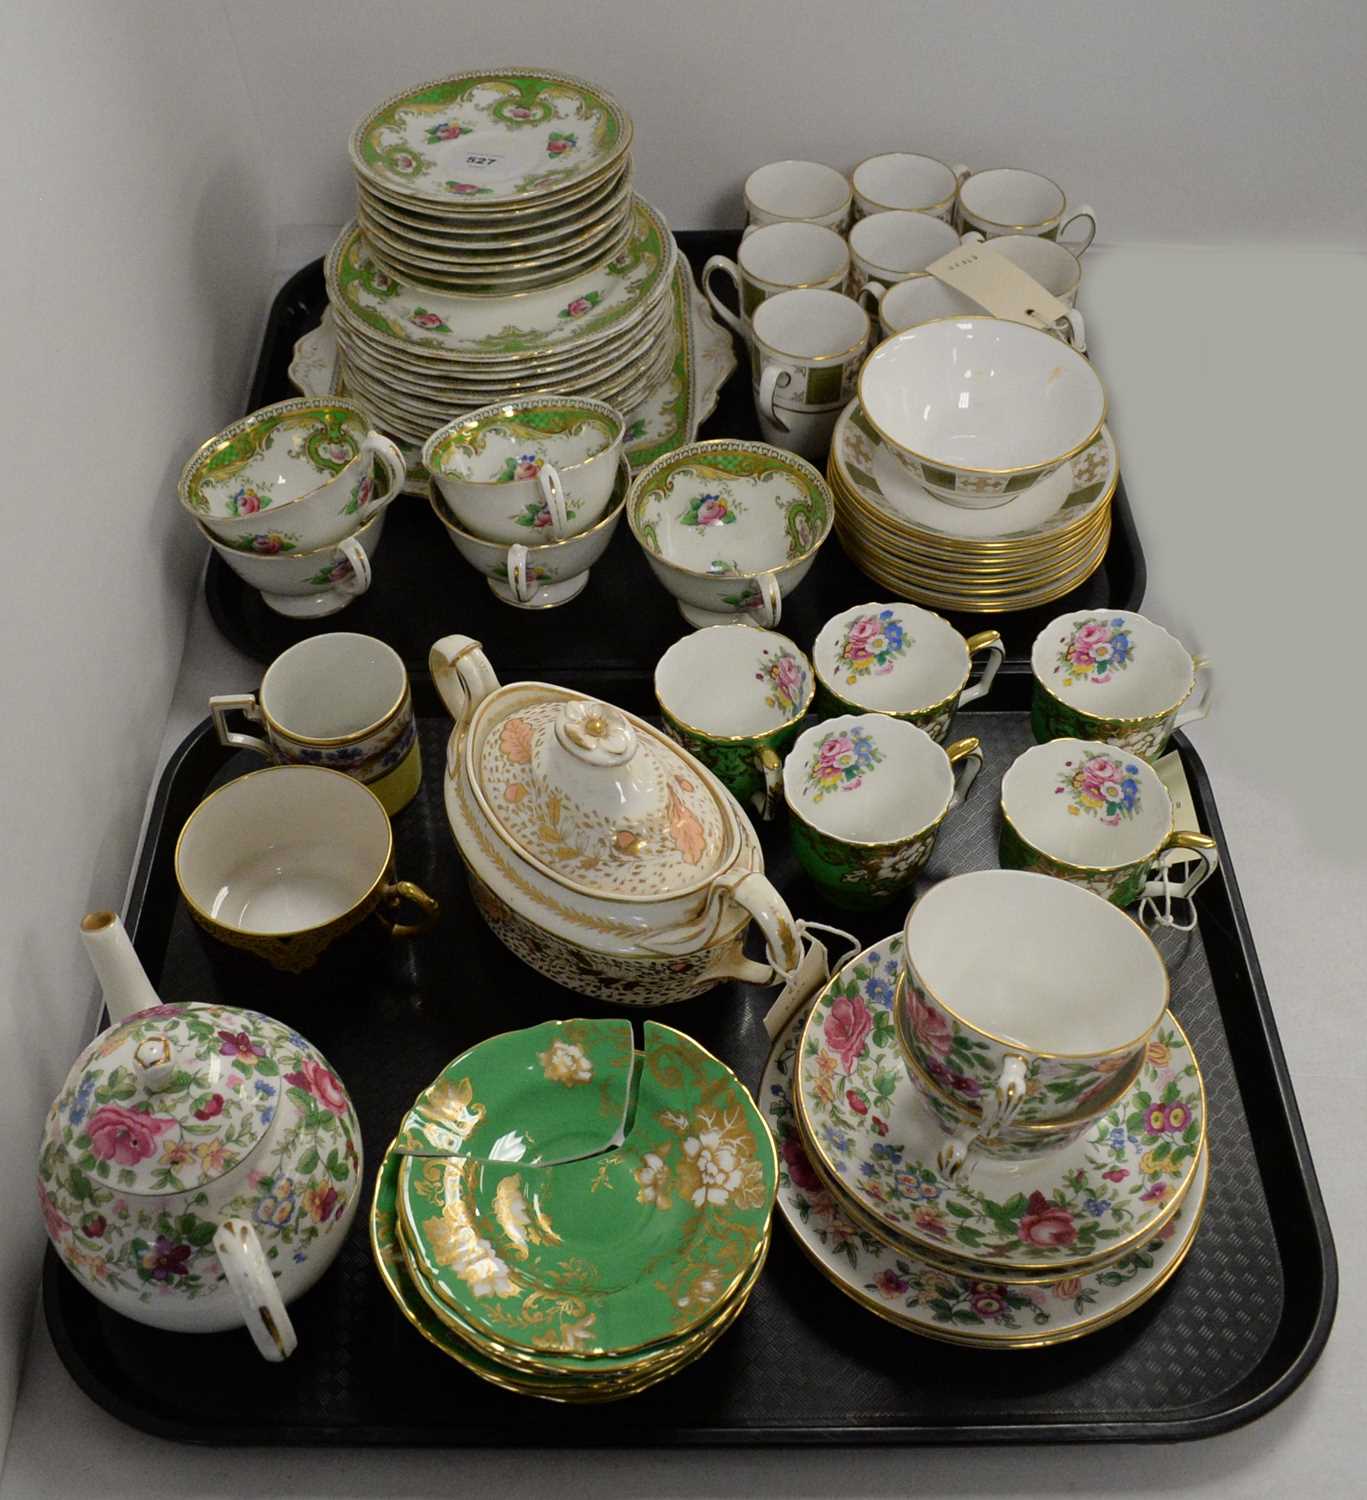 Selection of antique and modern teaware.